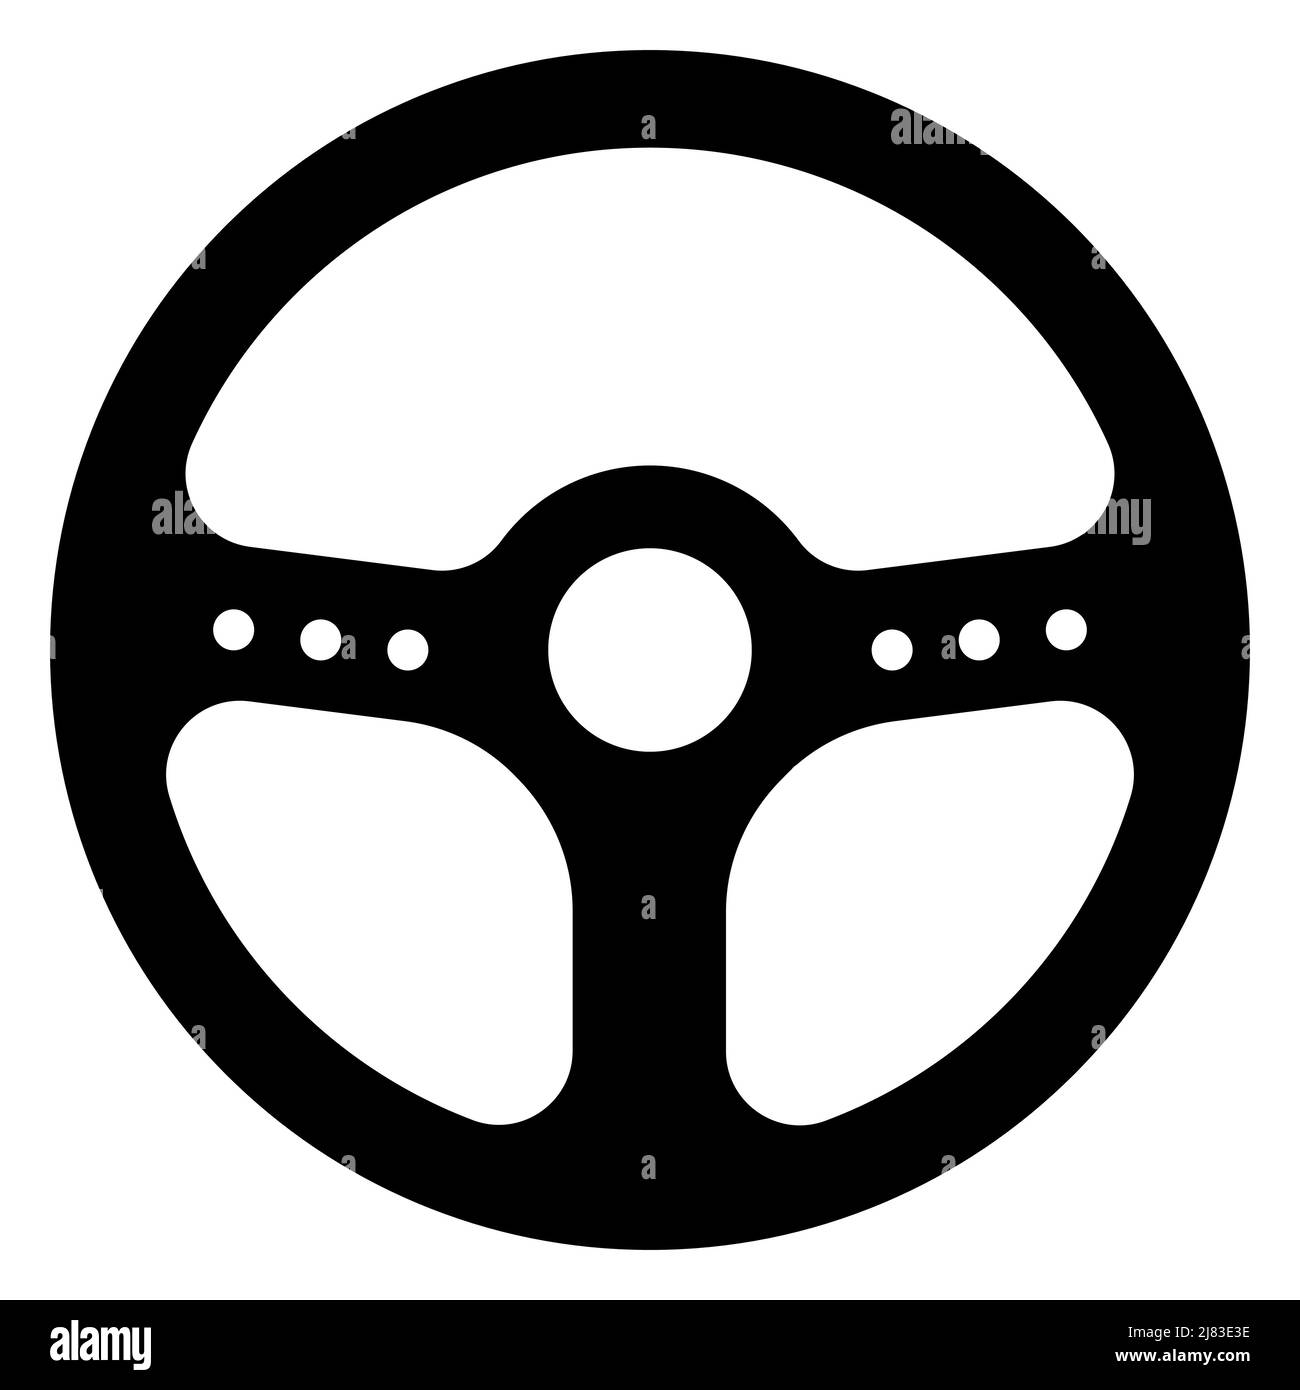 Car steering wheel icon. Vector illustration isolated on white background Stock Vector